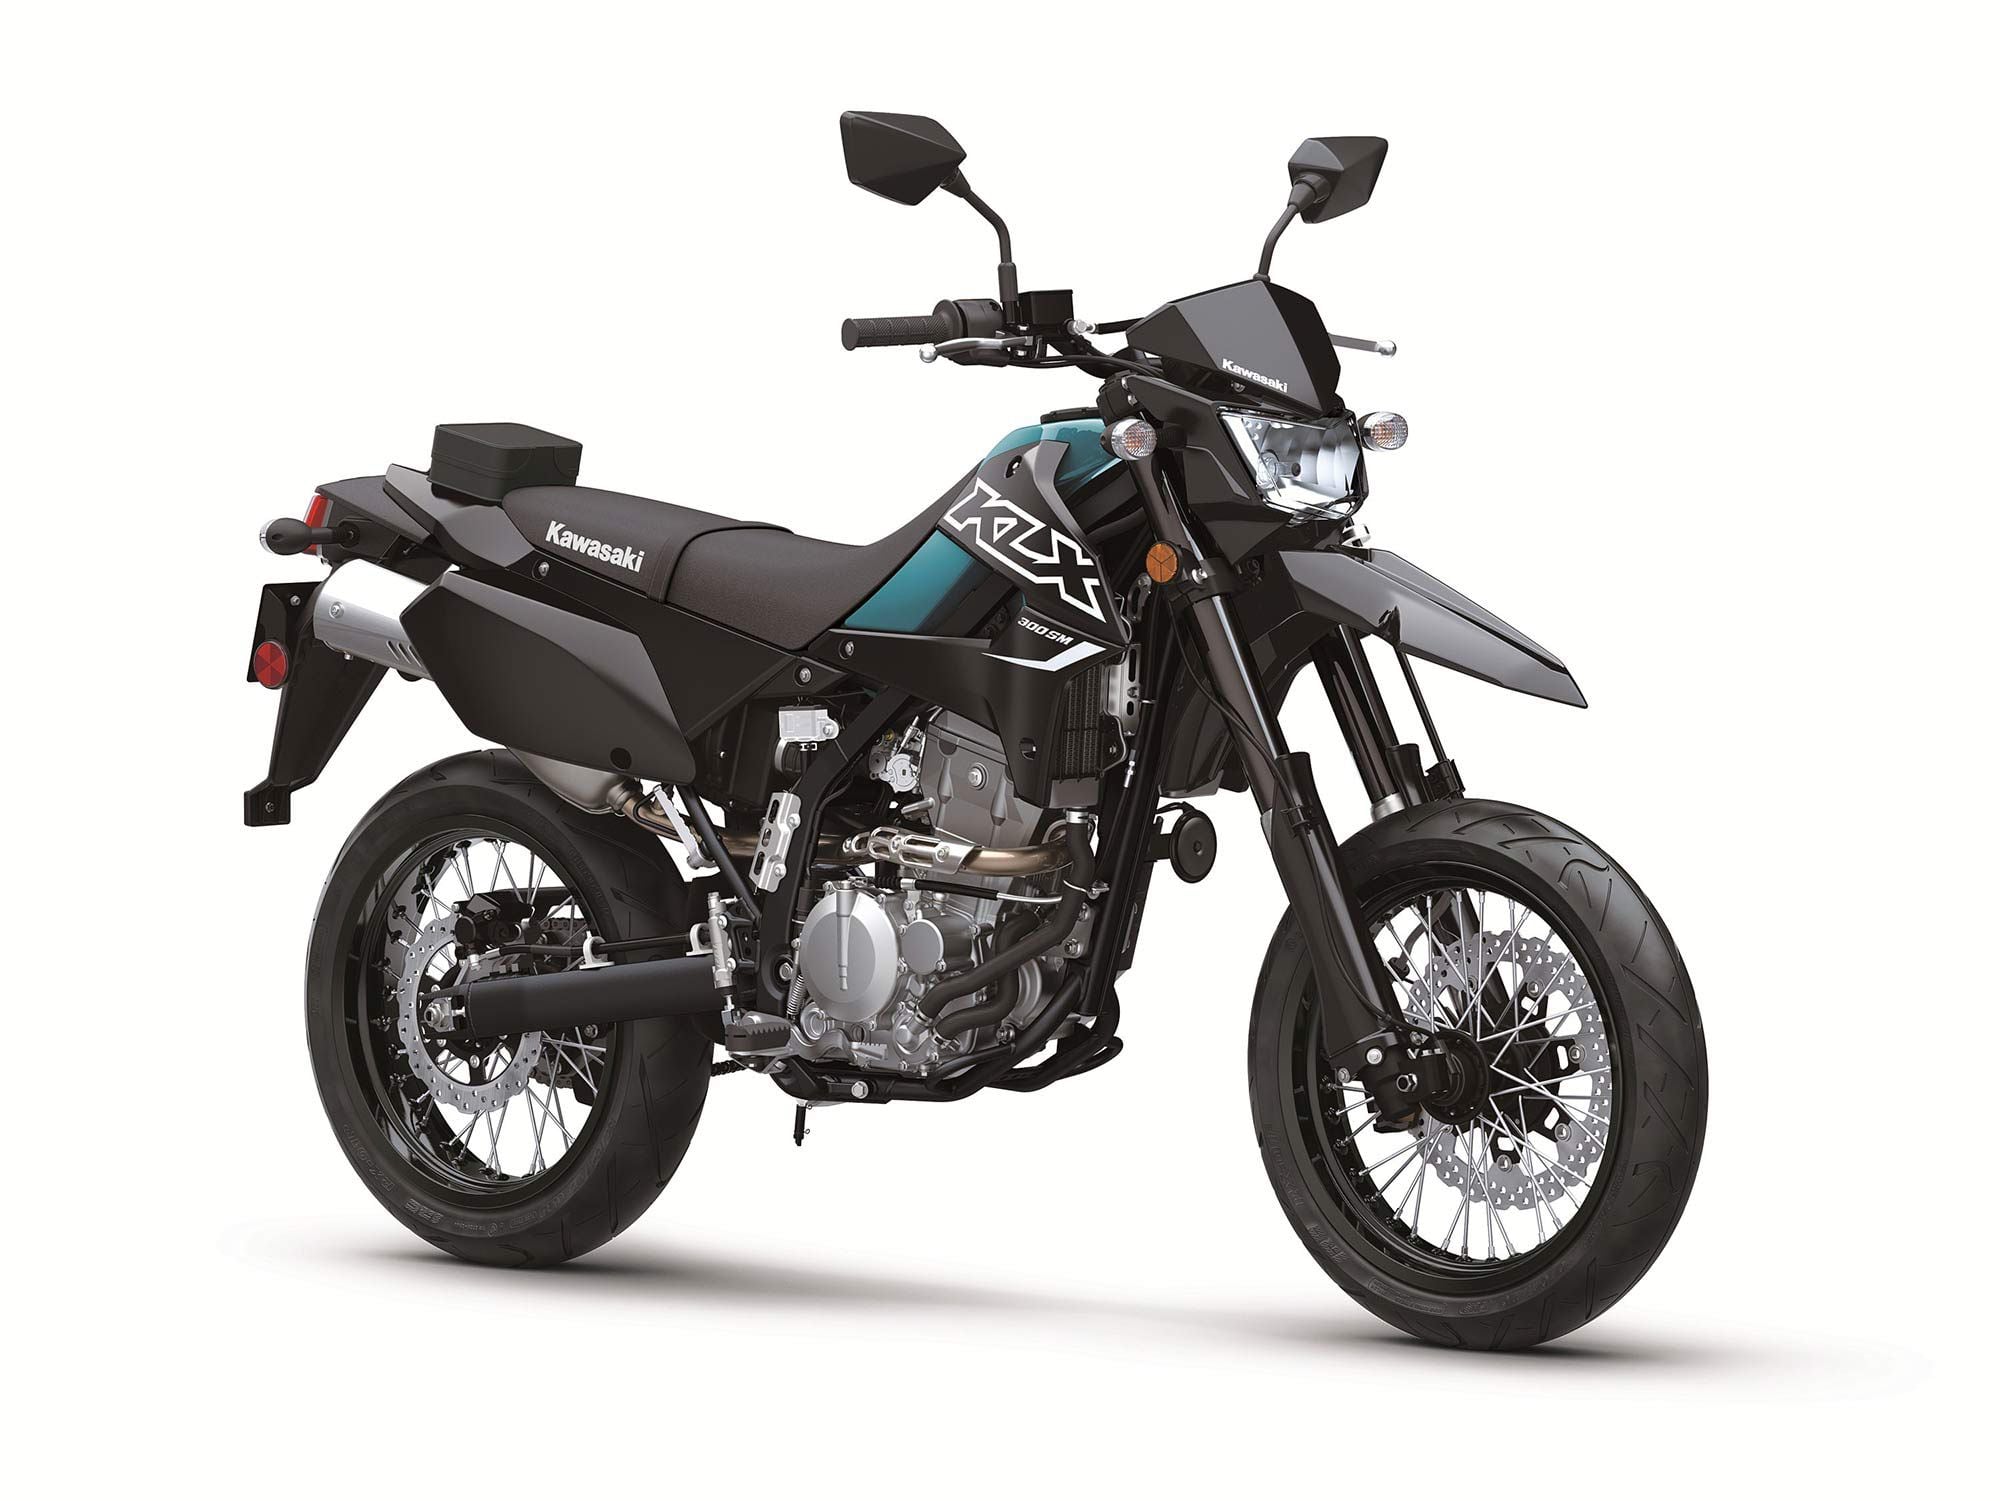 The 2023 KLX300SM is available in two color options: Lime Green and Fragment Camo Gray.